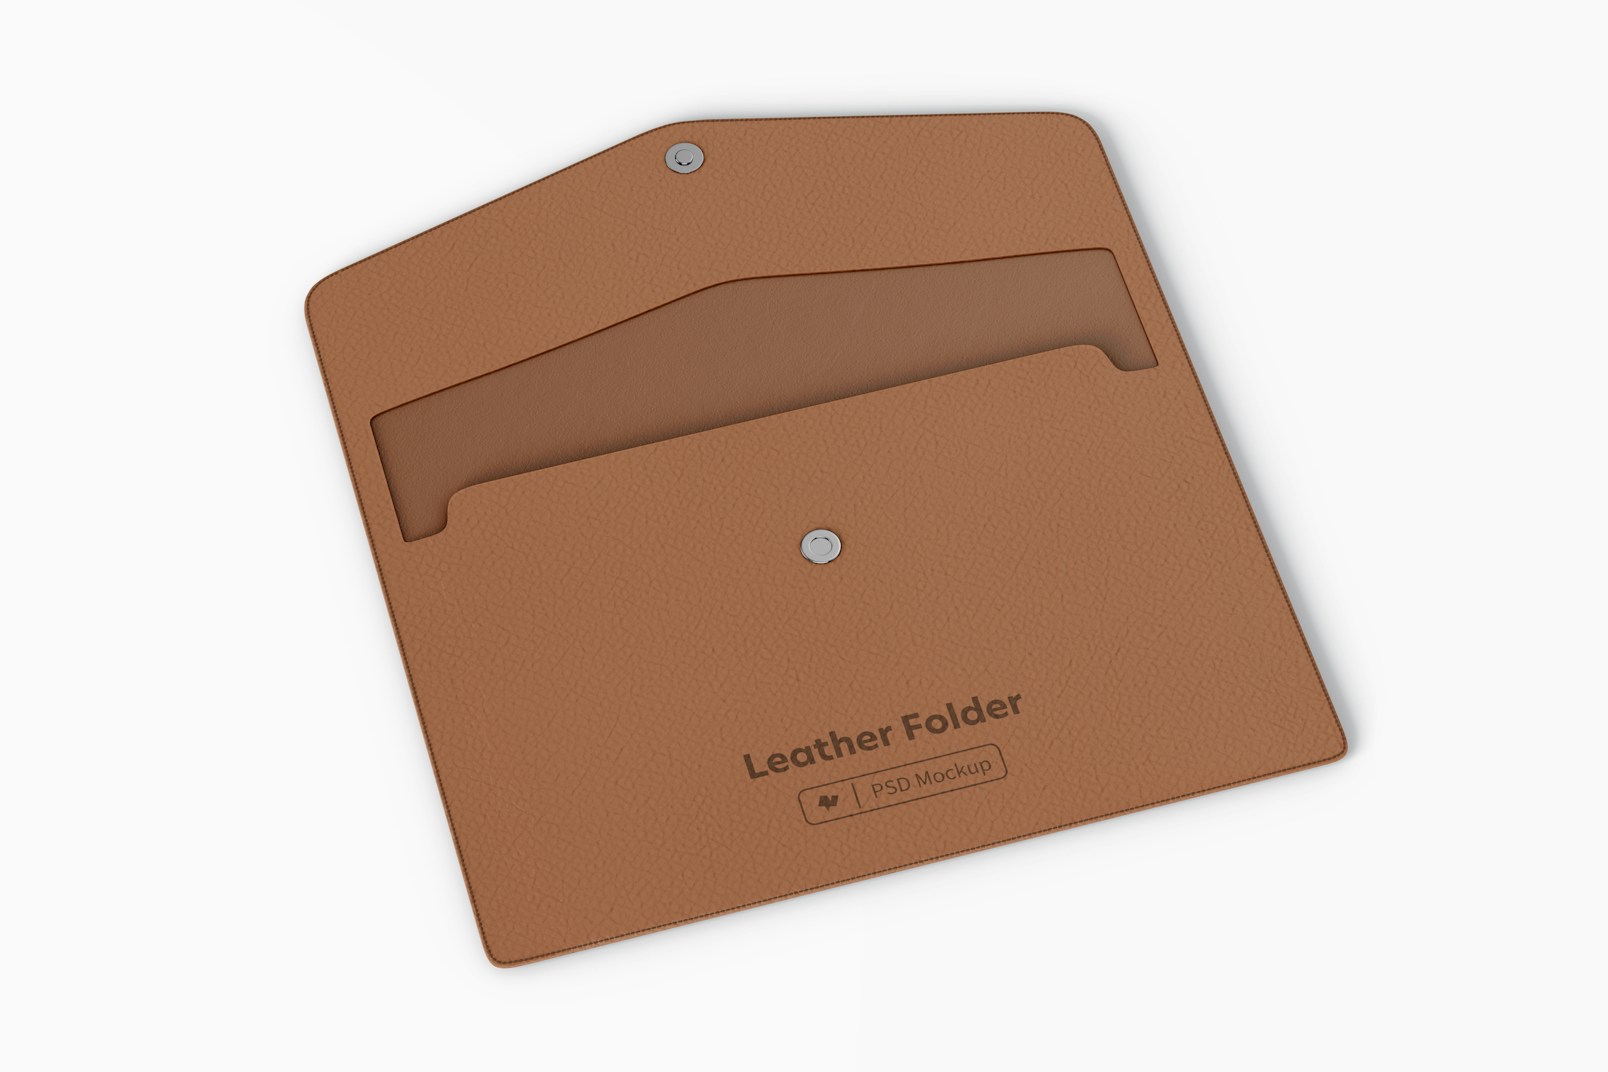 Leather Folder Mockup, Top View